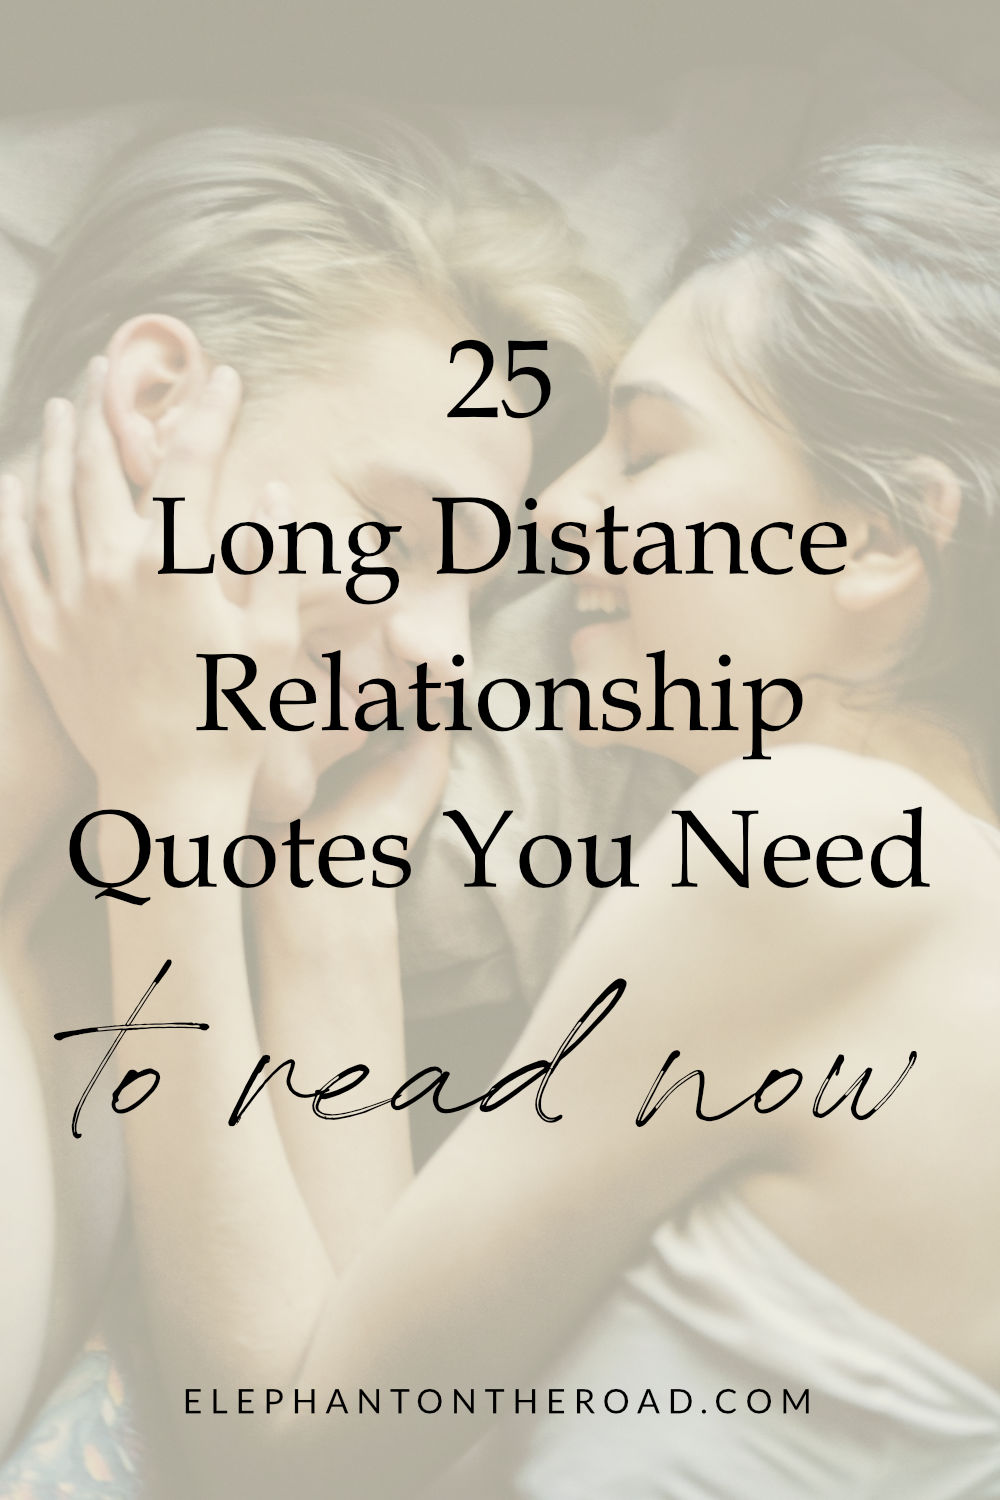 Quotes dating 51 Best